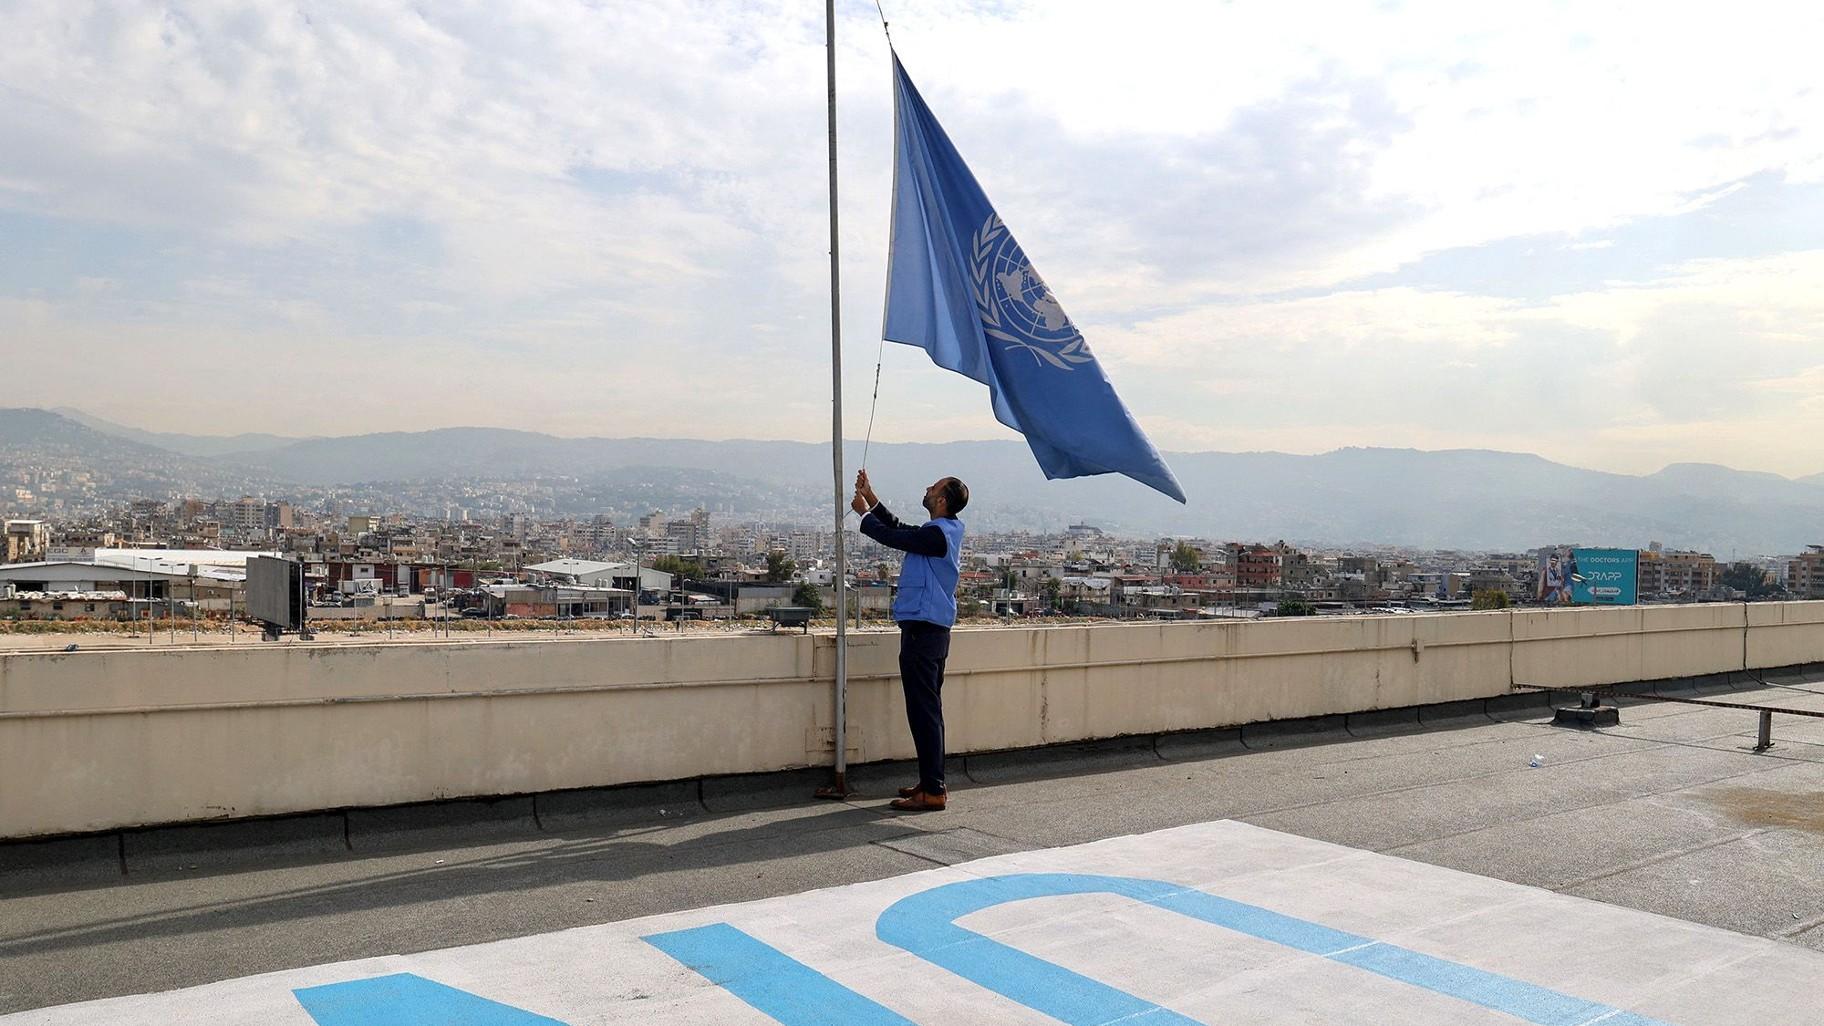 An UNRWA employee lowers the UN flag at the organization’s offices in the Lebanese capital Beirut on Nov. 13, as the flags flew at half-staff at UN compounds across the globe as staff observed a minute's silence for colleagues killed in Gaza. (Anwar Amro / AFP / Getty Images)